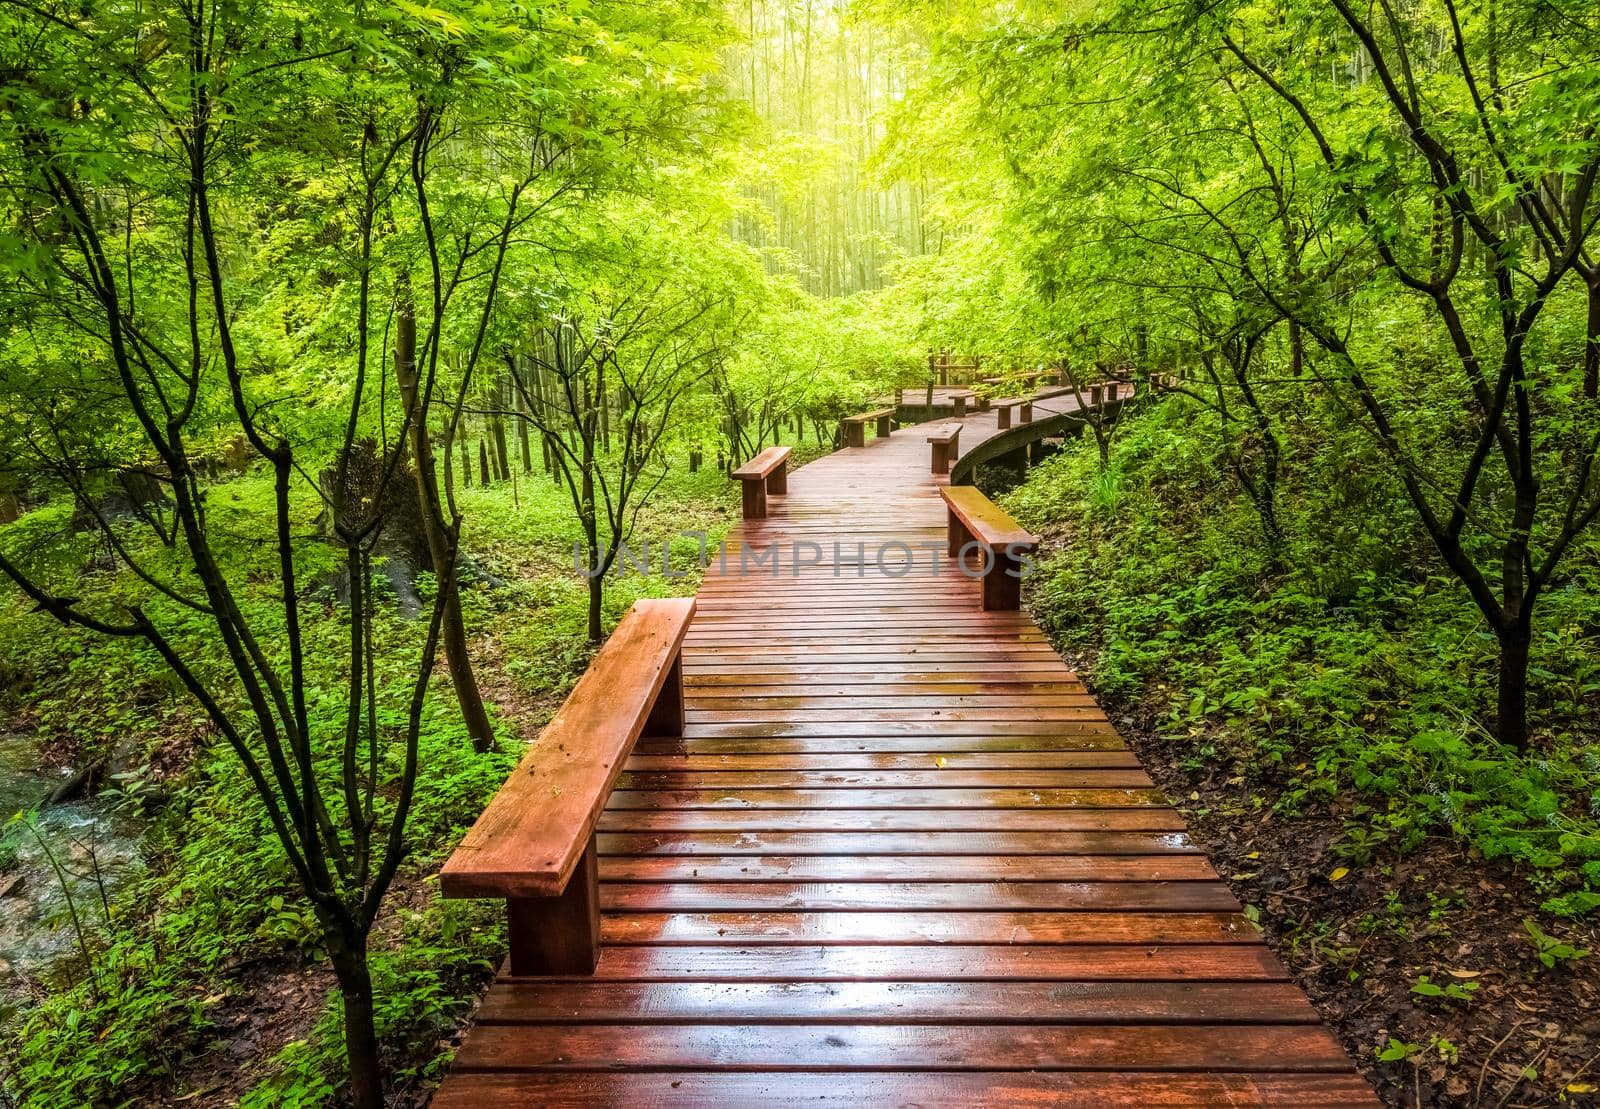 Wooden walkway and green natural scenery in the summer, Boardwalk in the park, Boardwalk in forest by isaiphoto